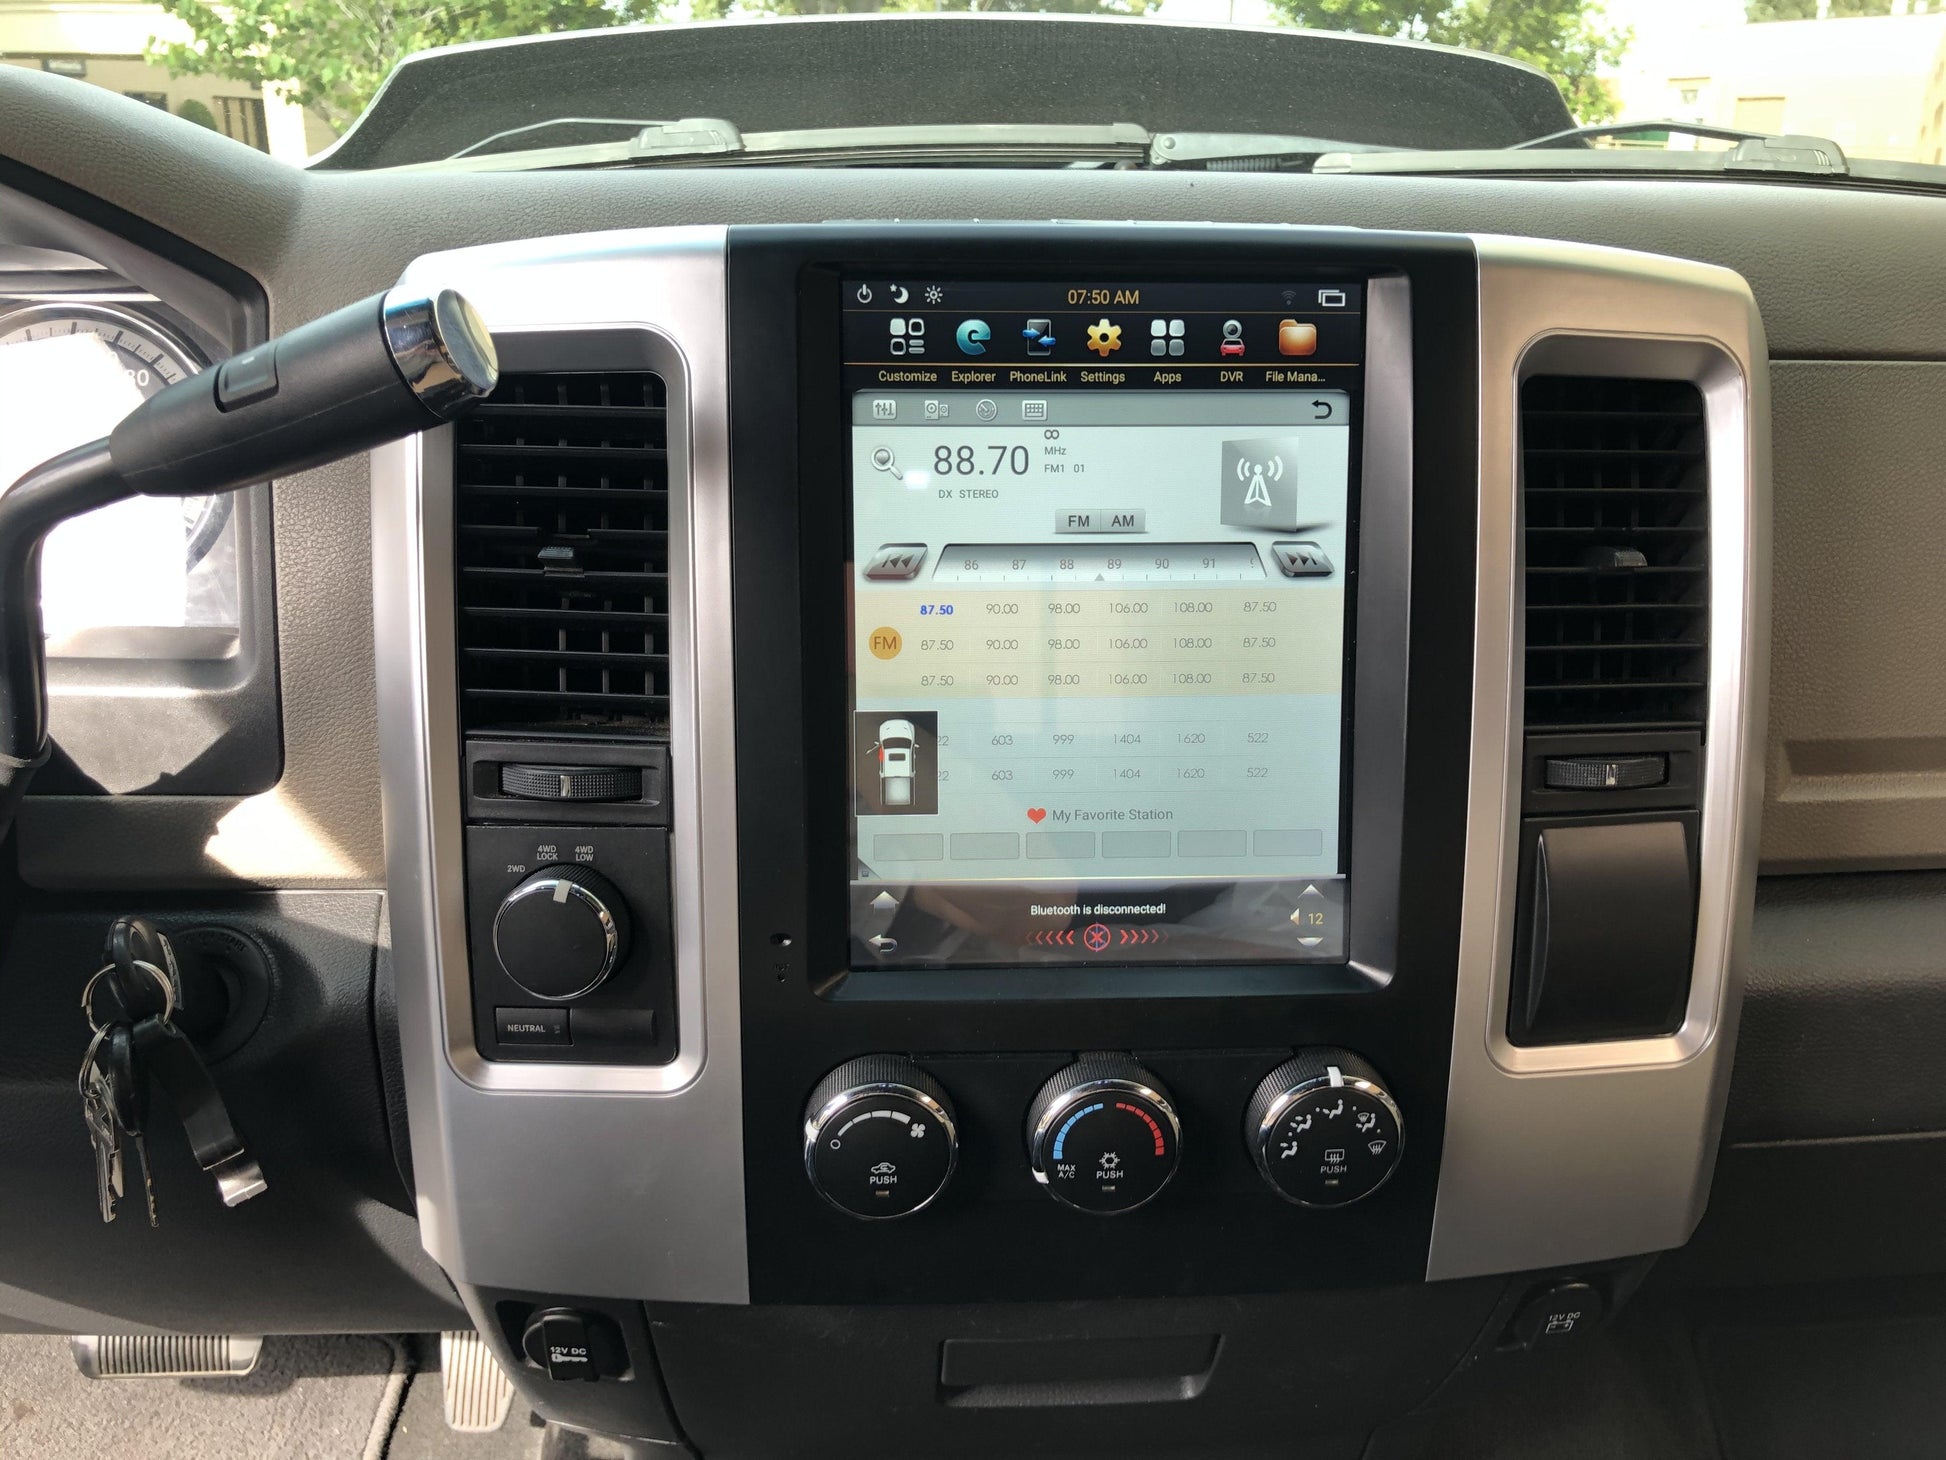 Open box [ PX6 SIX-CORE ] 10.4” / 12.1" Android 9 Fast boot Vertical Screen Navi Radio for Dodge Ram 2009 - 2018